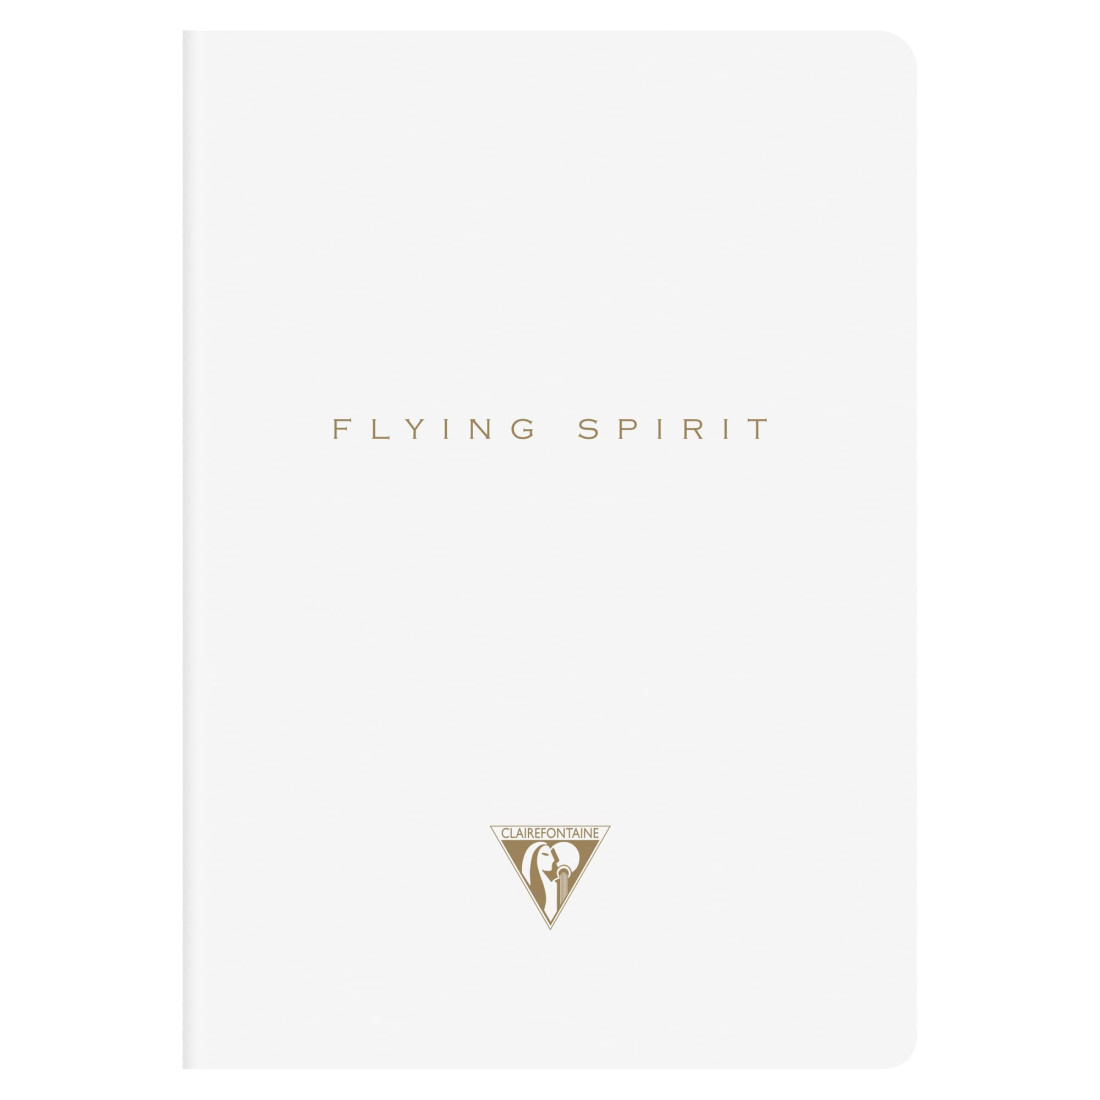 Clairefontaine Rhodia 104536C  Flying Spirit thread-stitched notebook 96 ivory pages 14.8x21 cm 90g lined, laminated white card cover